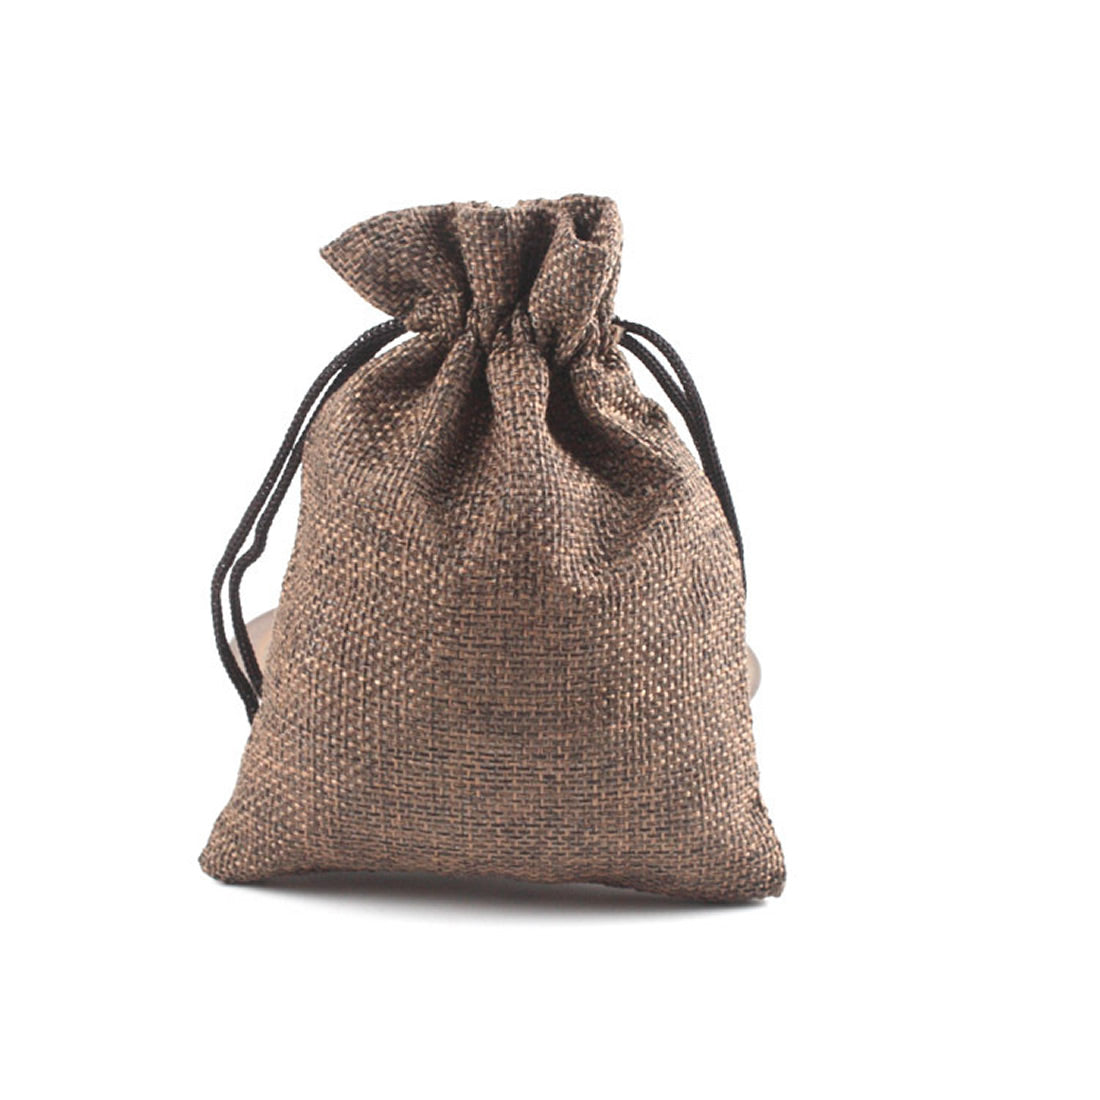 PK/10 - Coffee Brown - COTTON #5 BAGS 2.75 x 3.5 inch - 7x9cm - with Draw String